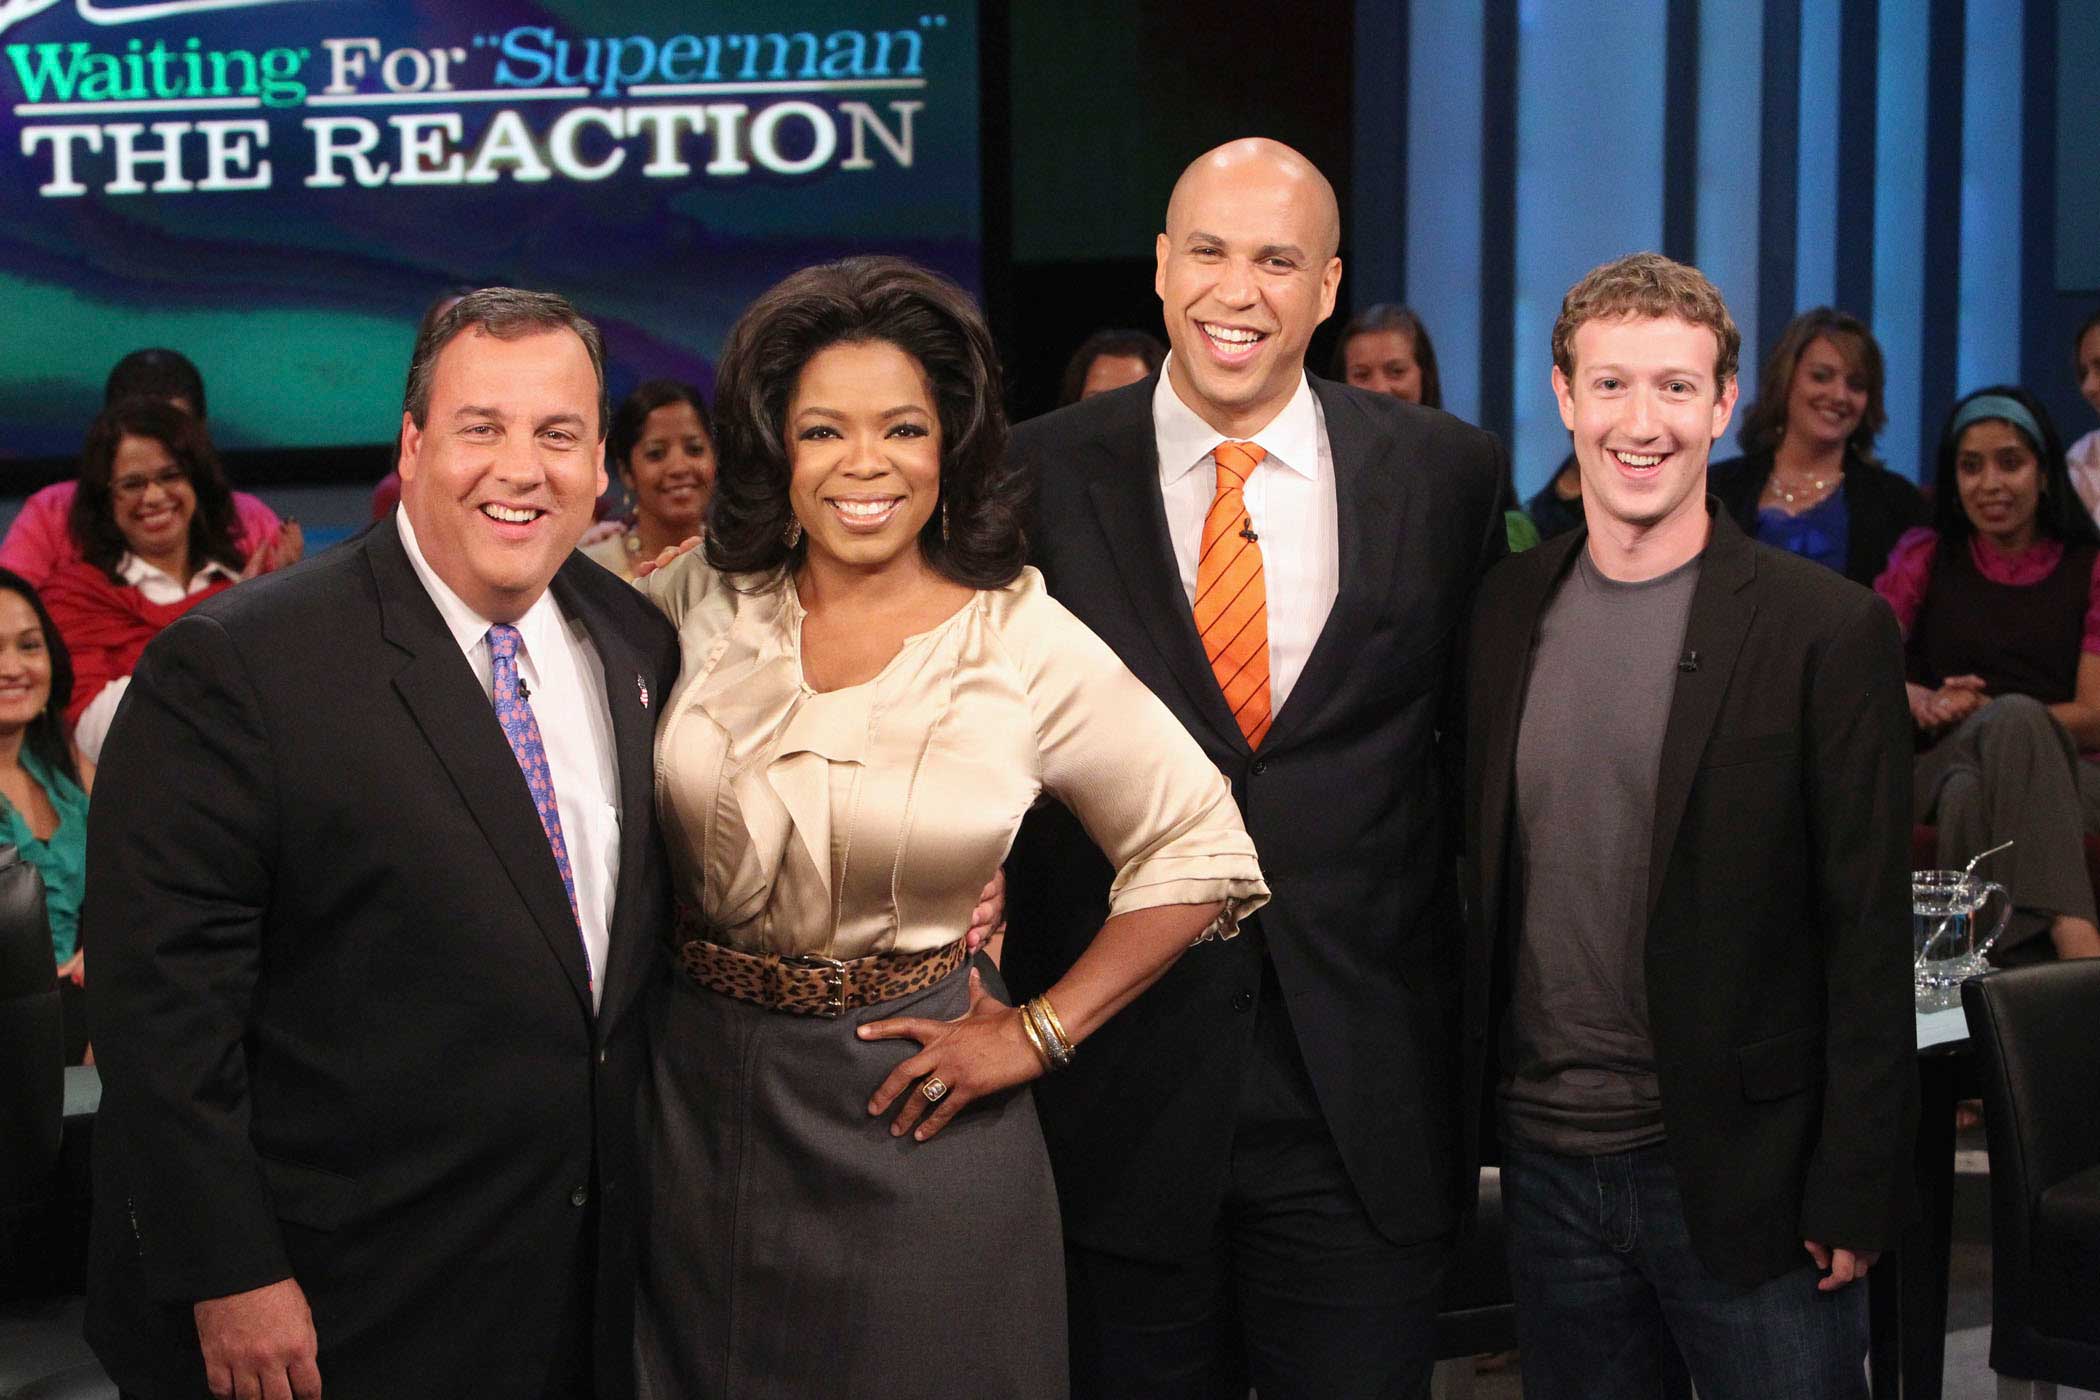 Talk-show host Oprah Winfrey poses with New Jersey Gov. Chris Christie, Newark, N.J., Mayor Cory Booker and Mark Zuckerberg, founder of Facebook, during a live broadcast of "The Oprah Winfrey Show" on Sept. 24, 2010, in Chicago.